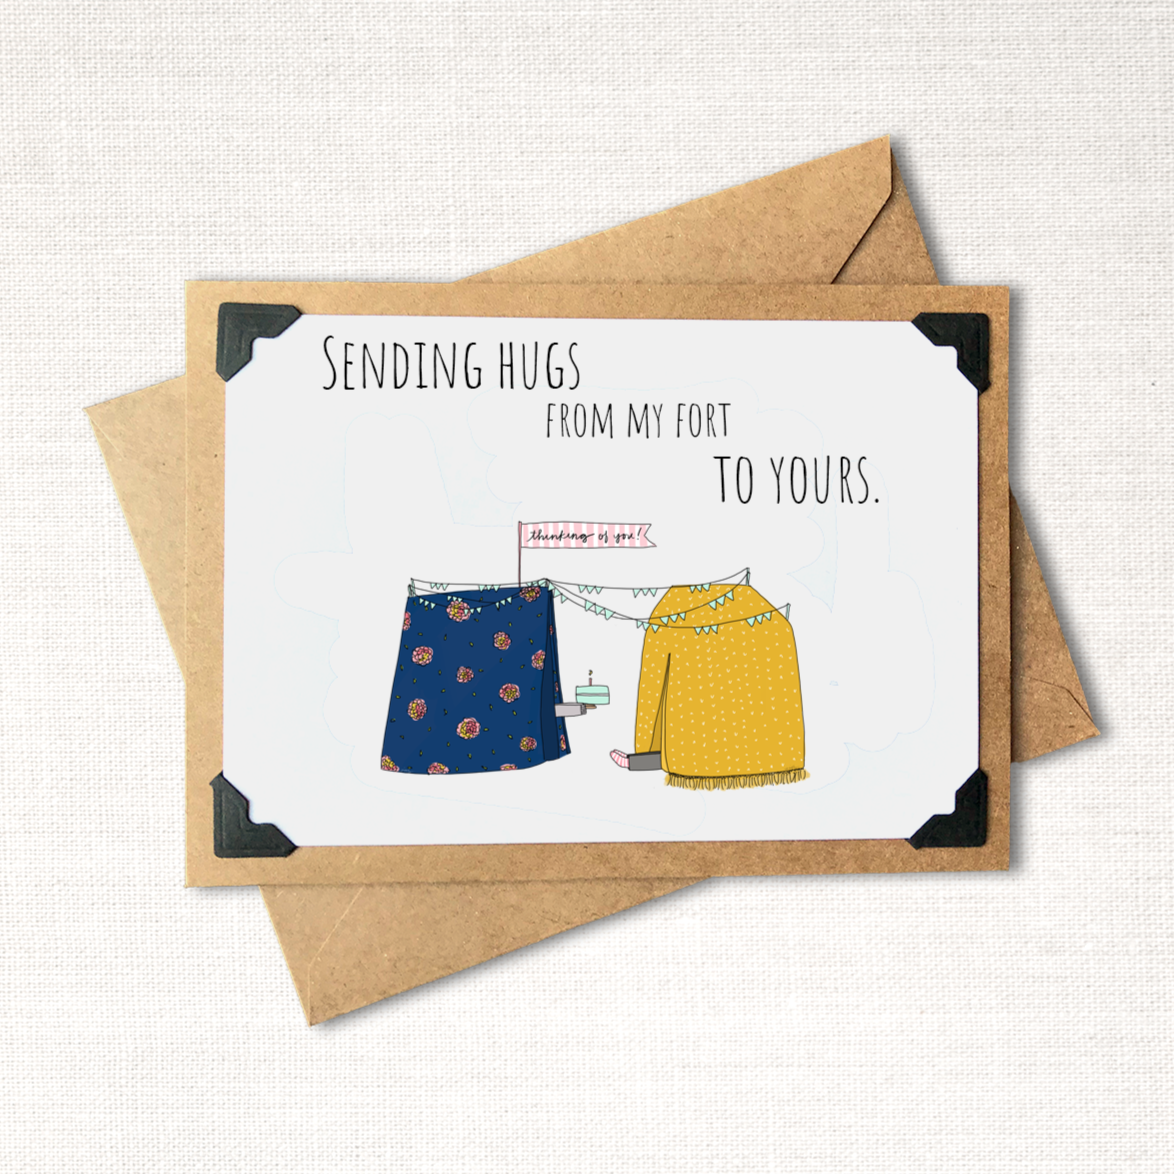 Rather Puckish Greeting Card - Many Styles